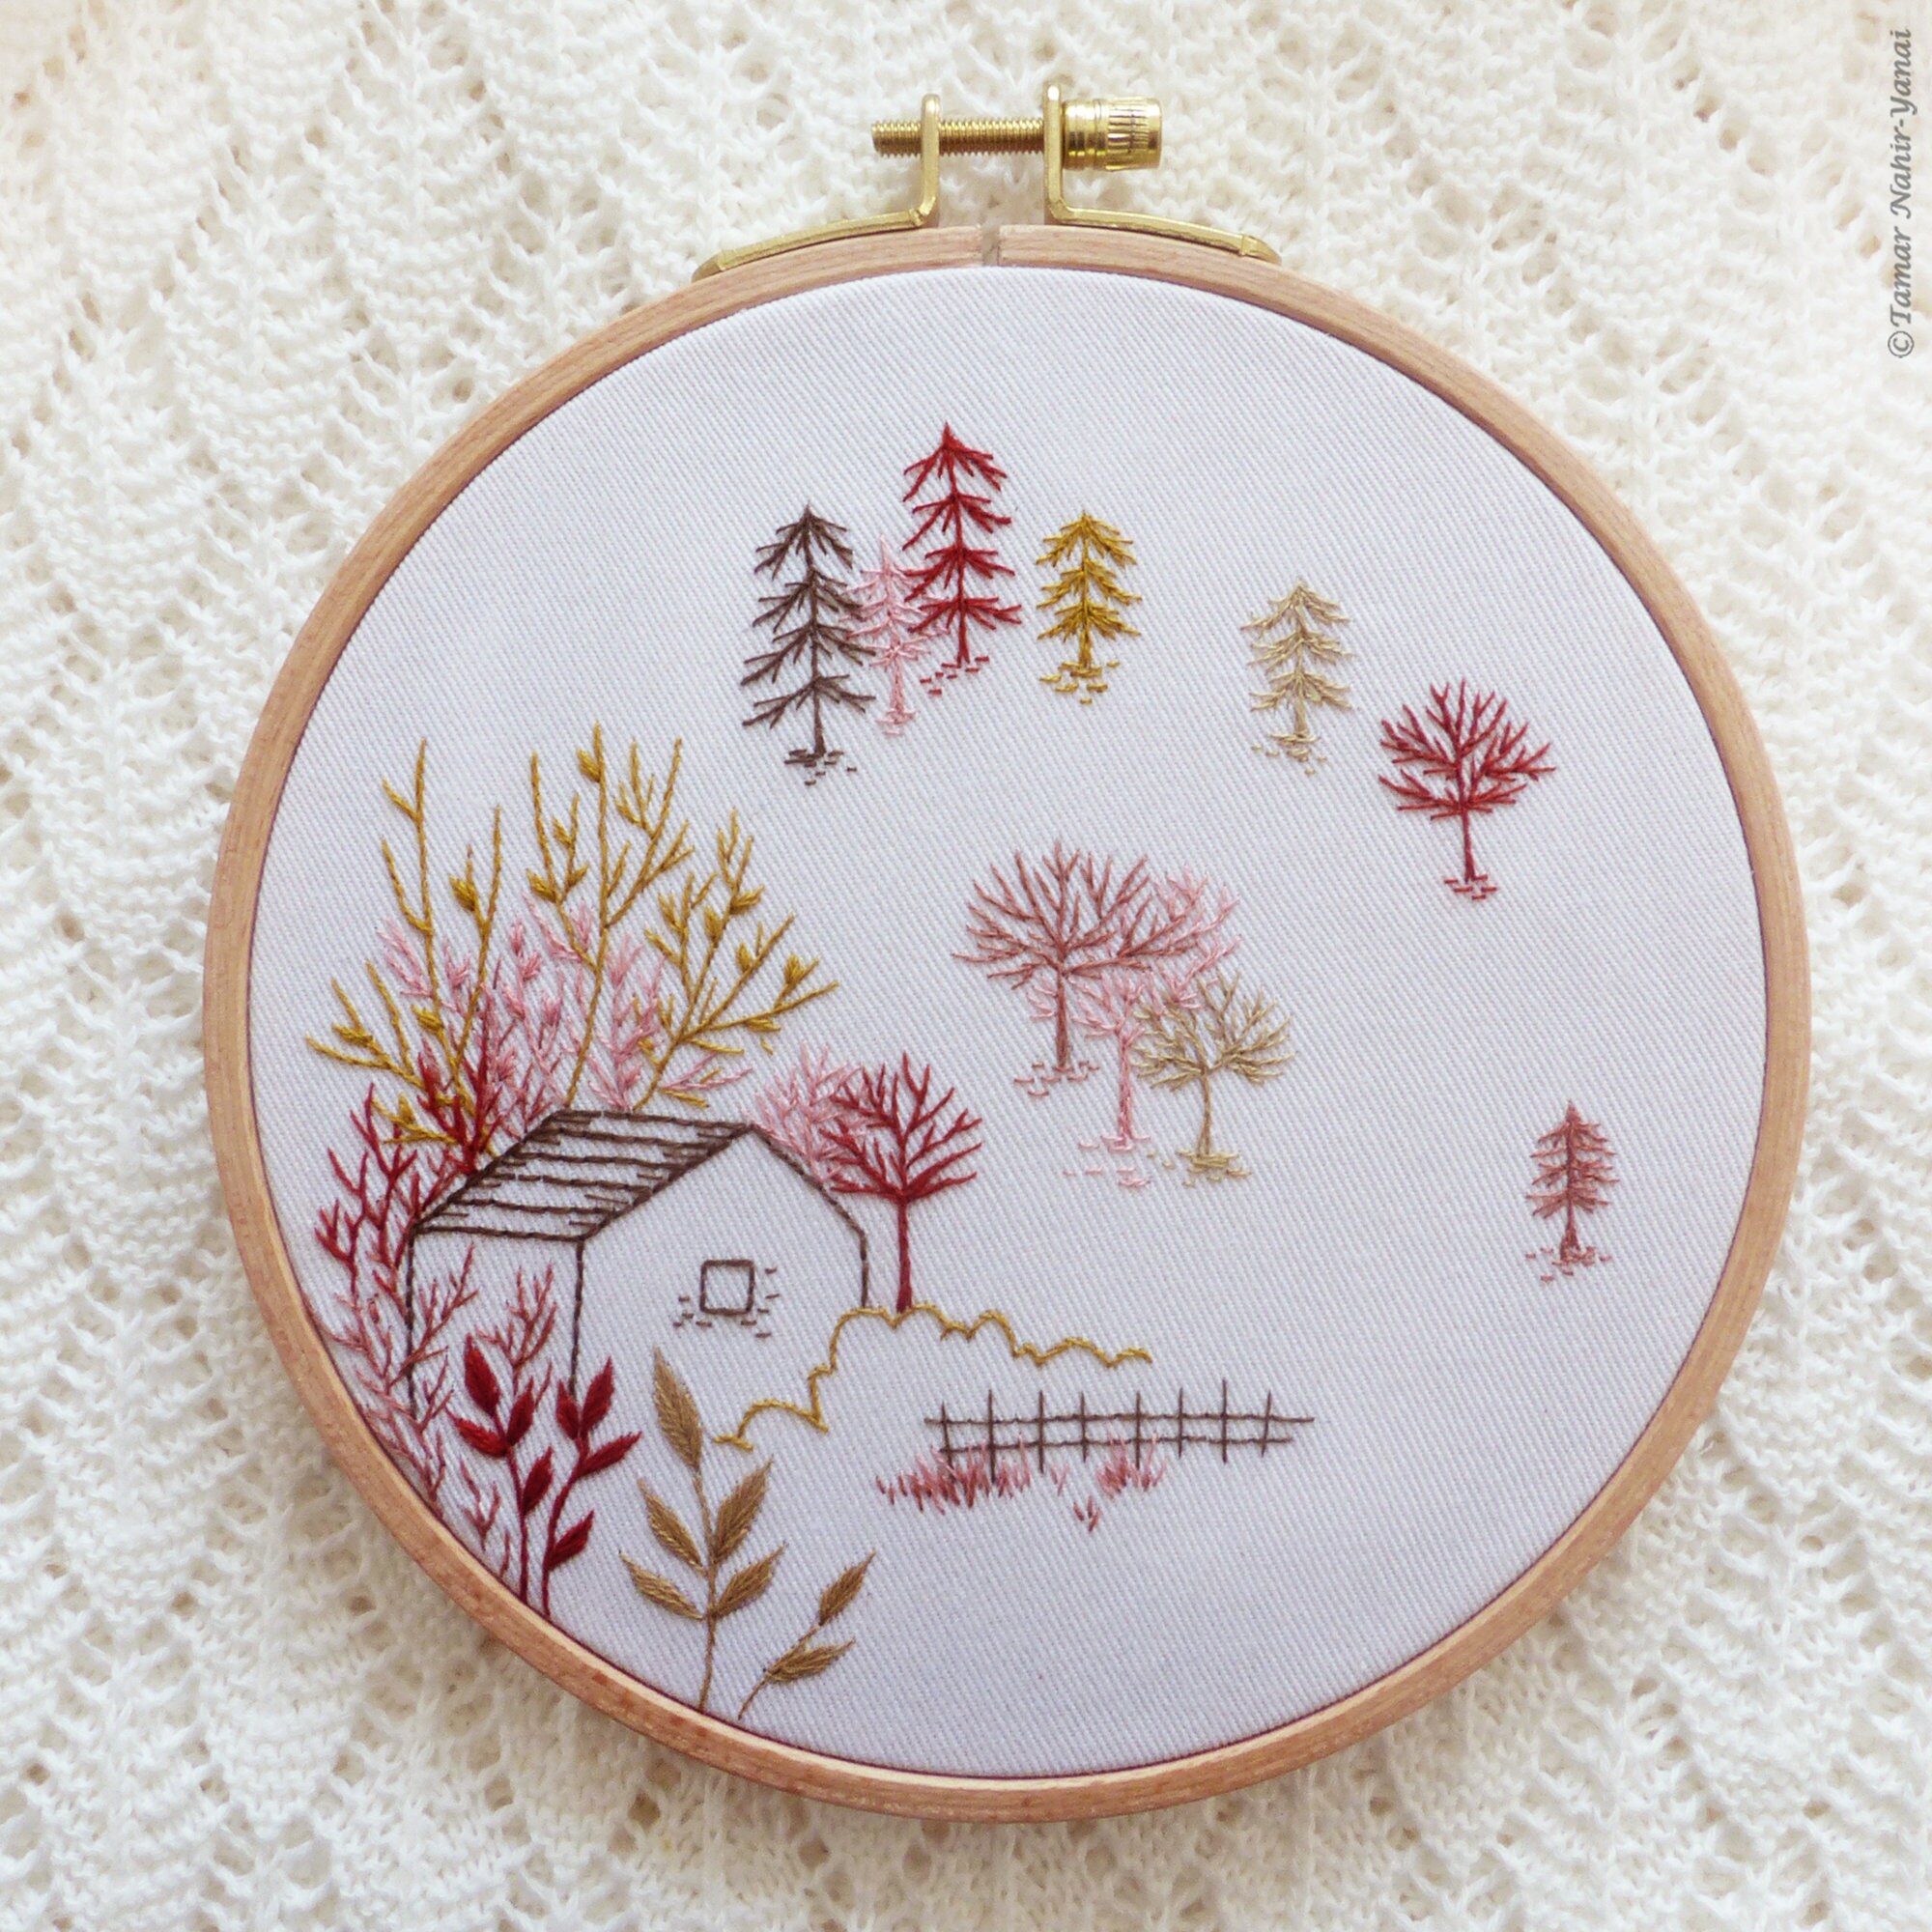 733. Embroidery Accessories in the Forest Tale ~ Embroidery